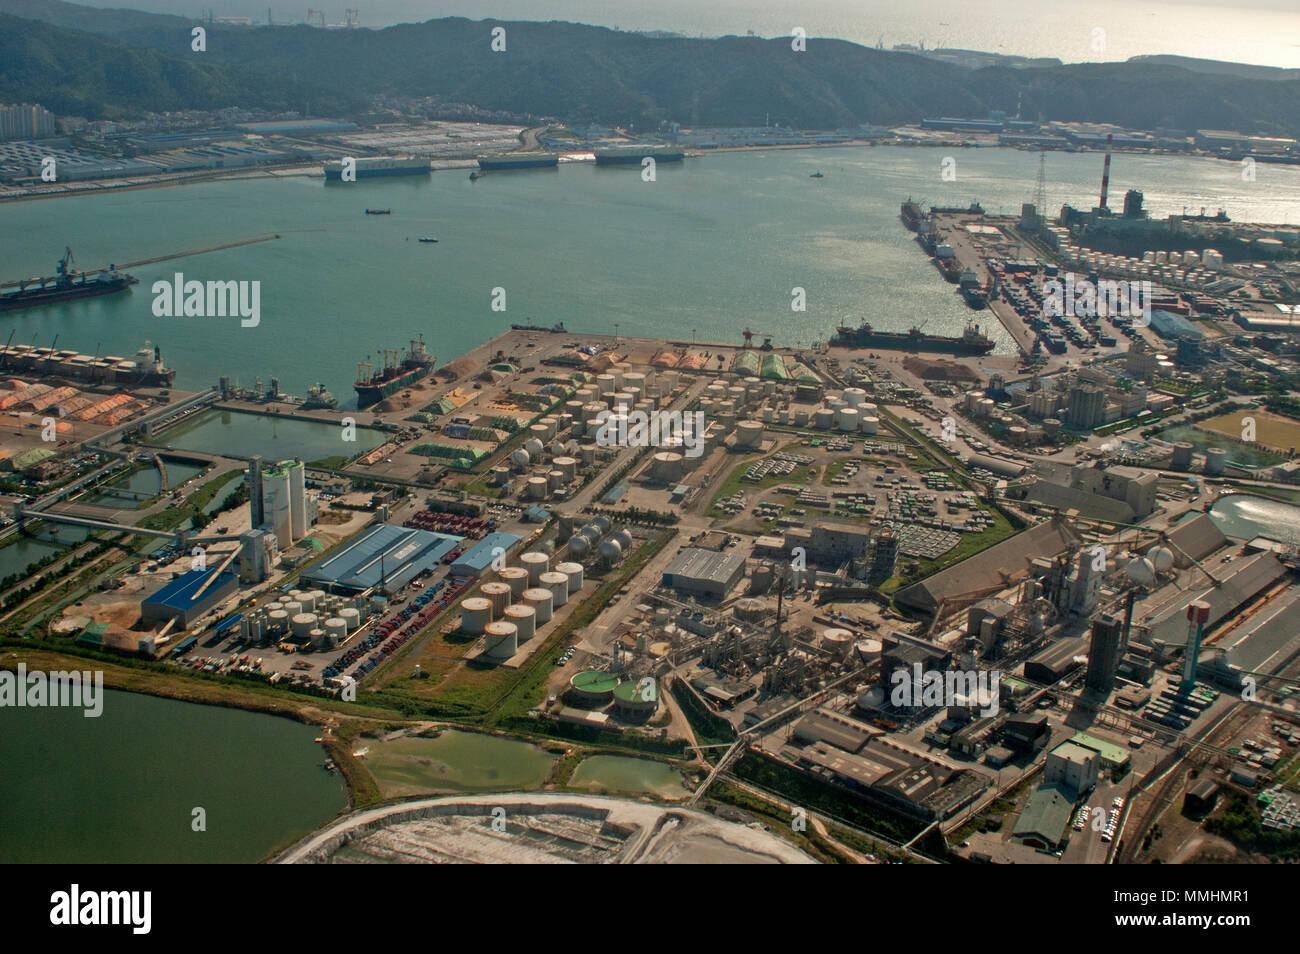 Aerial view of an industrial complex in Ulsan, South Korea Stock Photo